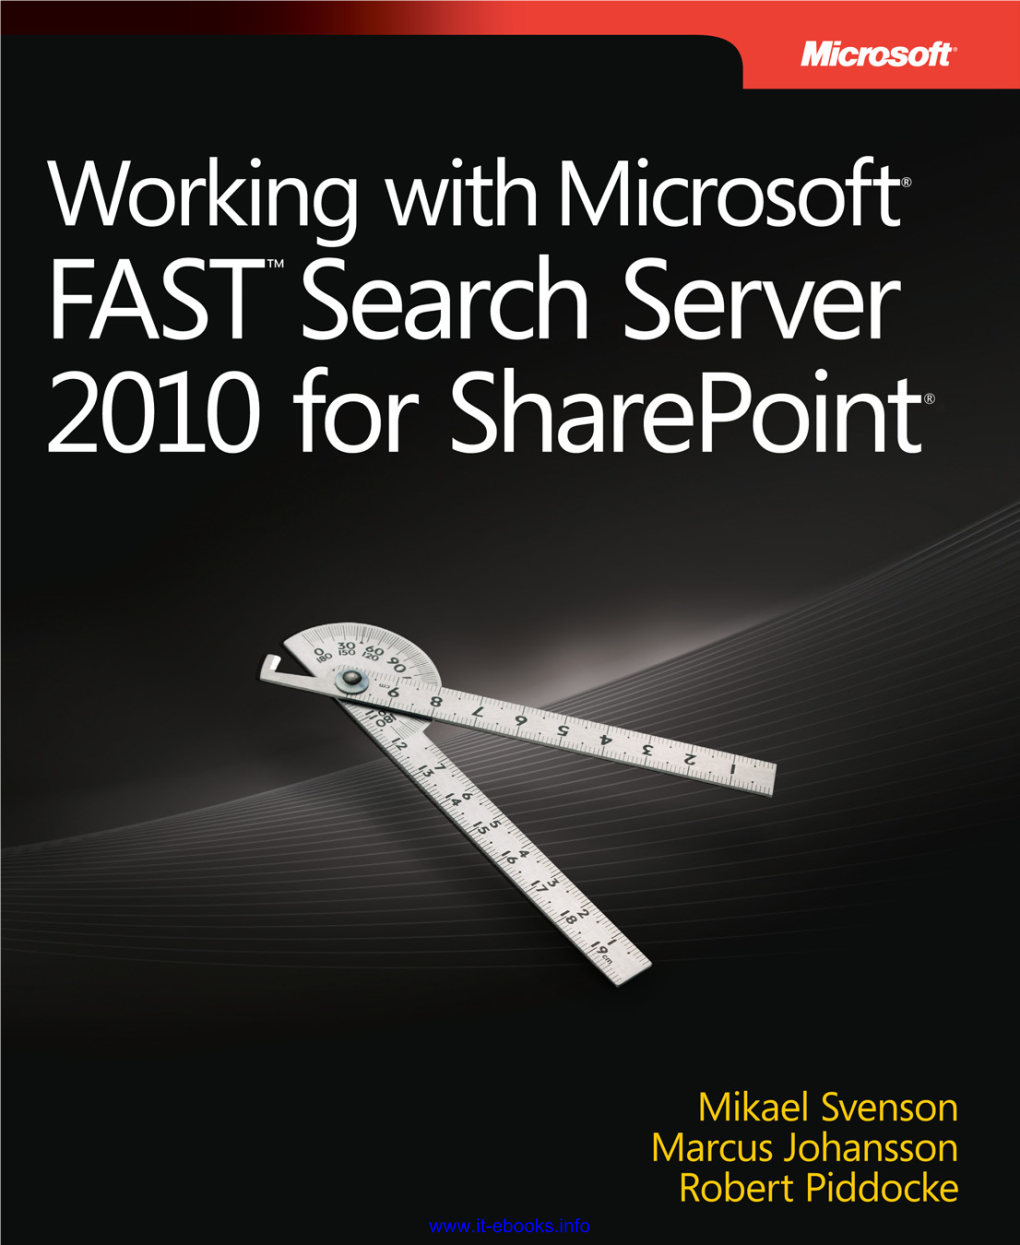 Introduction to FAST Search Server 2010 for Sharepoint